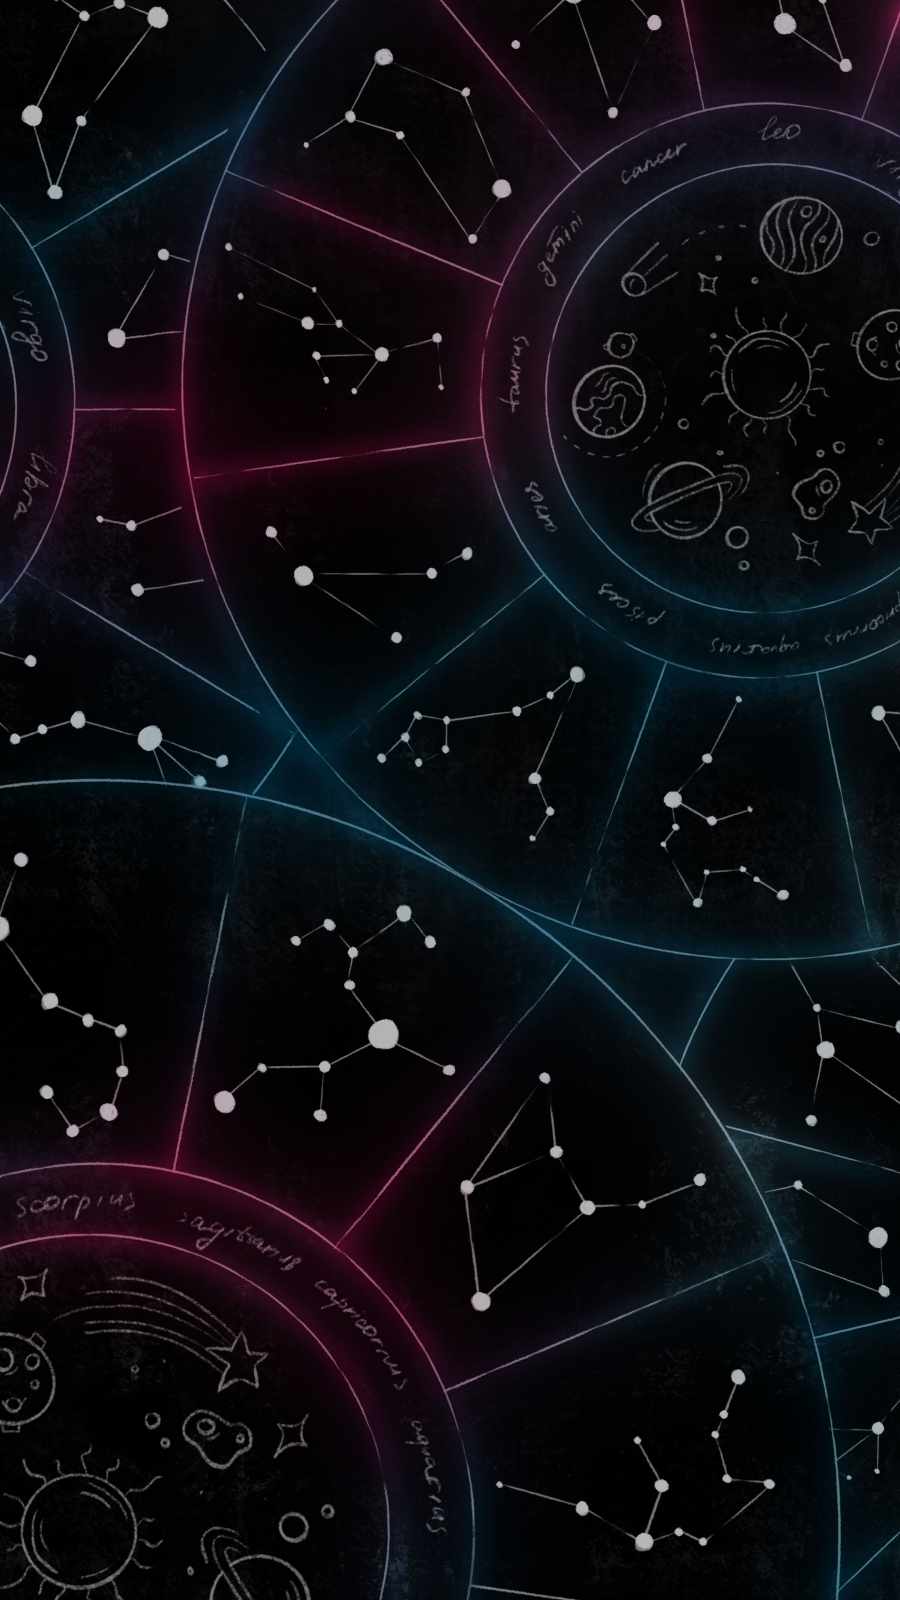 Astrology IPhone Wallpaper - IPhone Wallpapers : iPhone Wallpapers